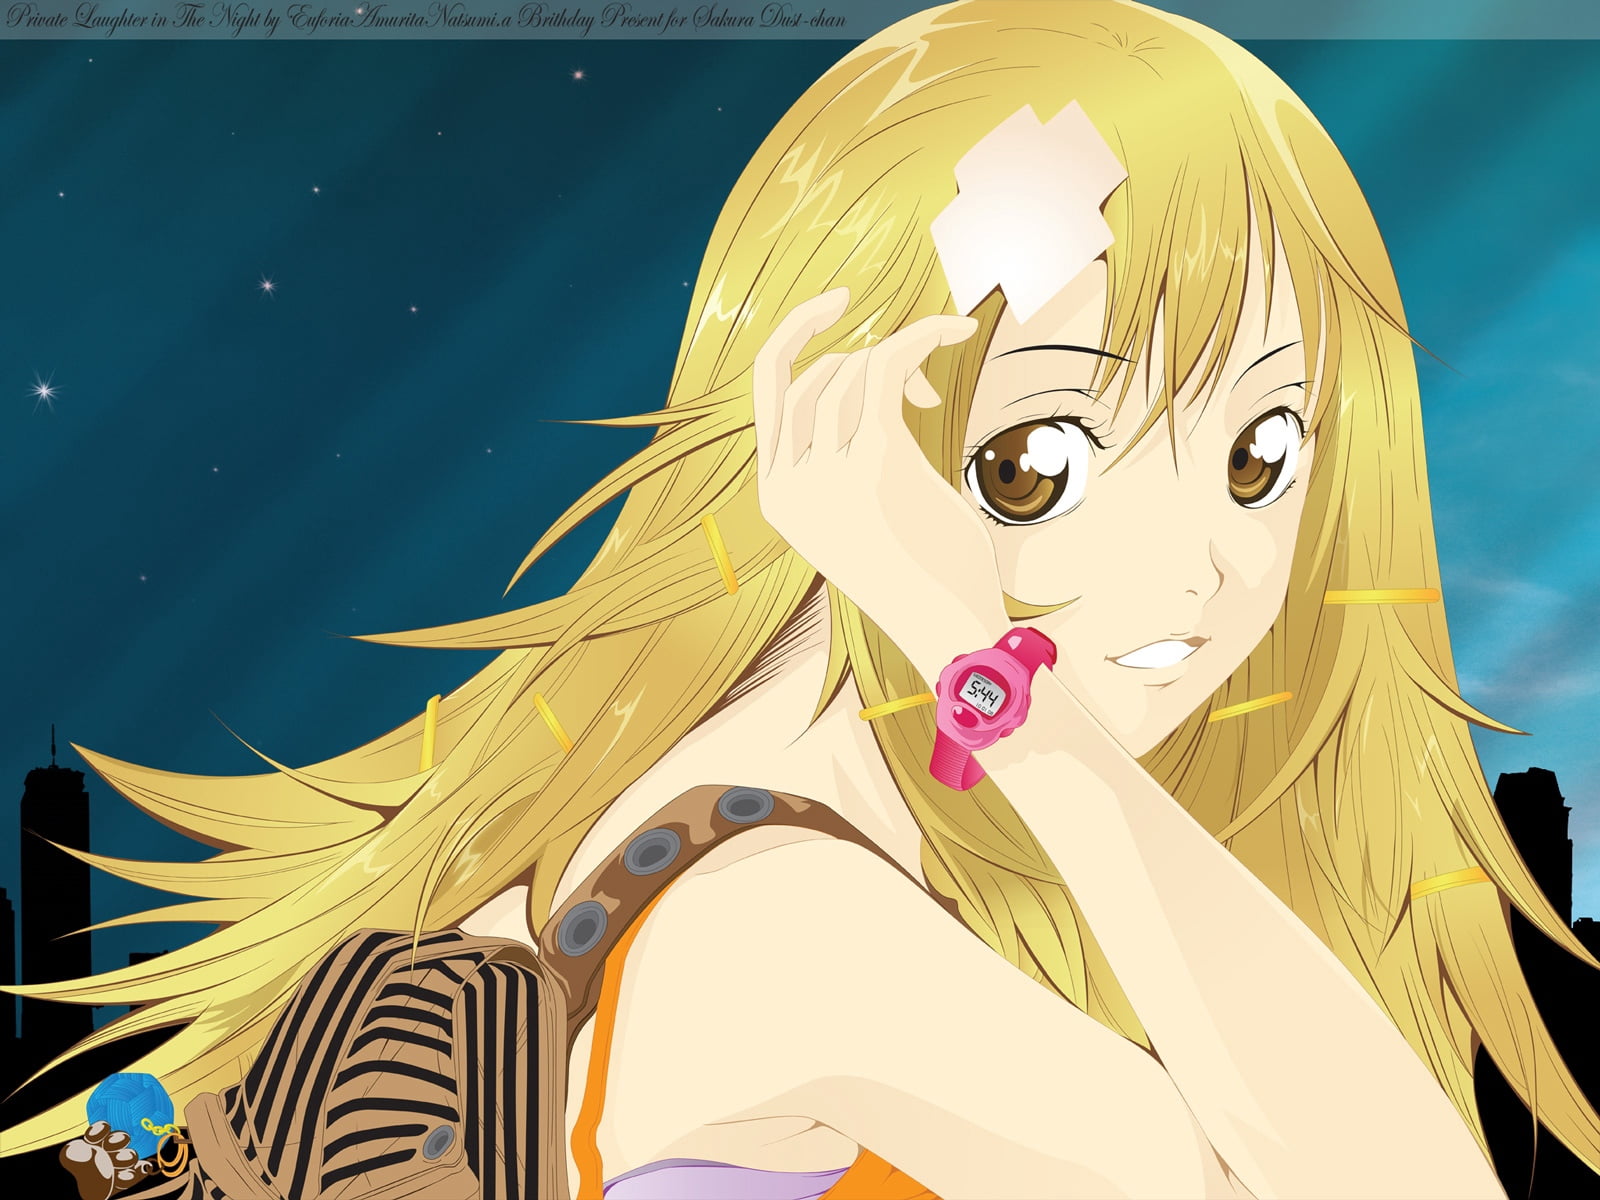 anime girl character with blonde hair, air gear, watches, gesture